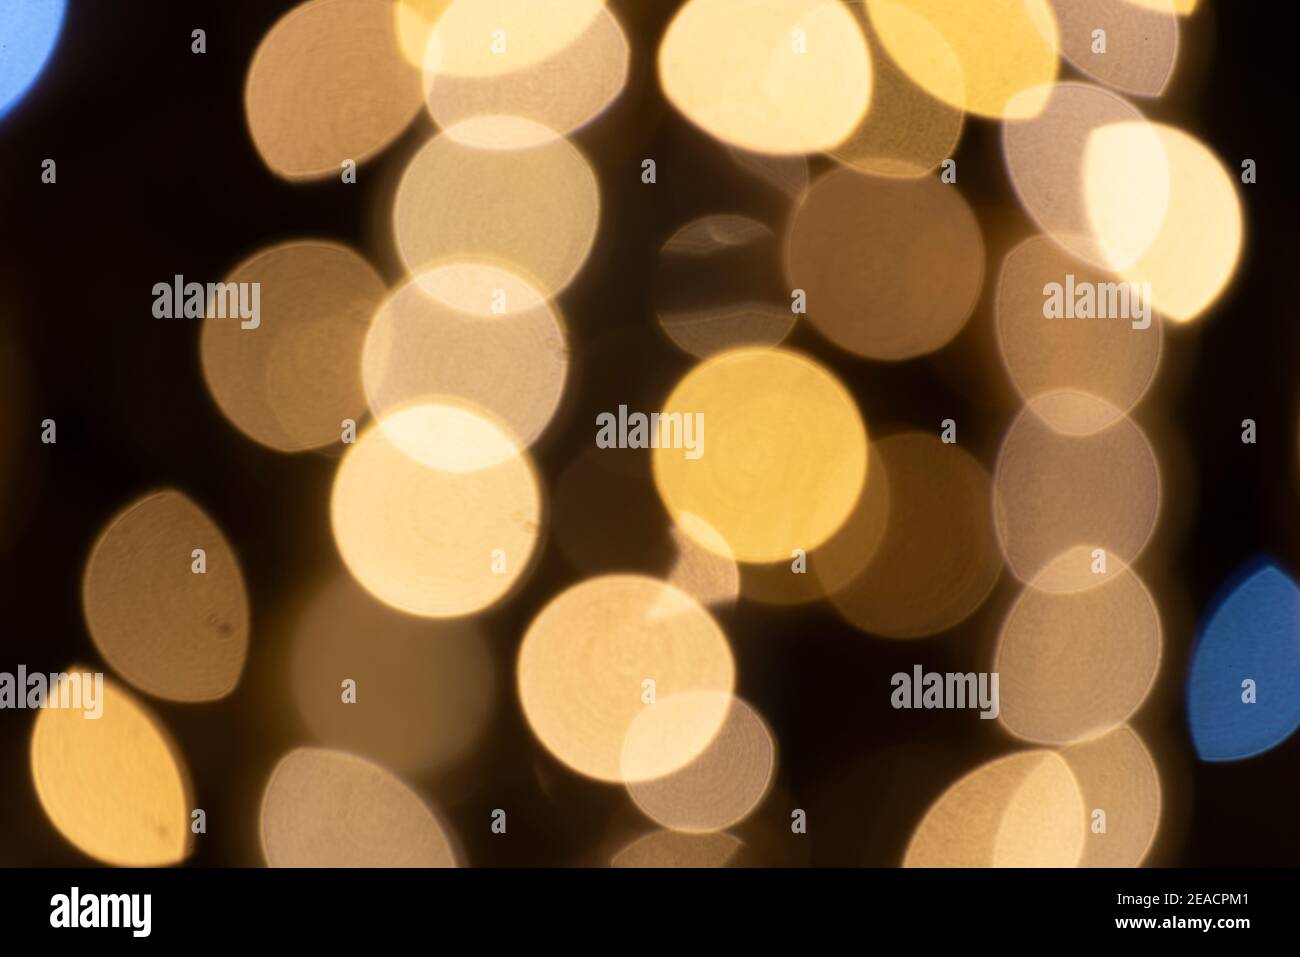 Abstract background with yellow and white lights. Stock Photo